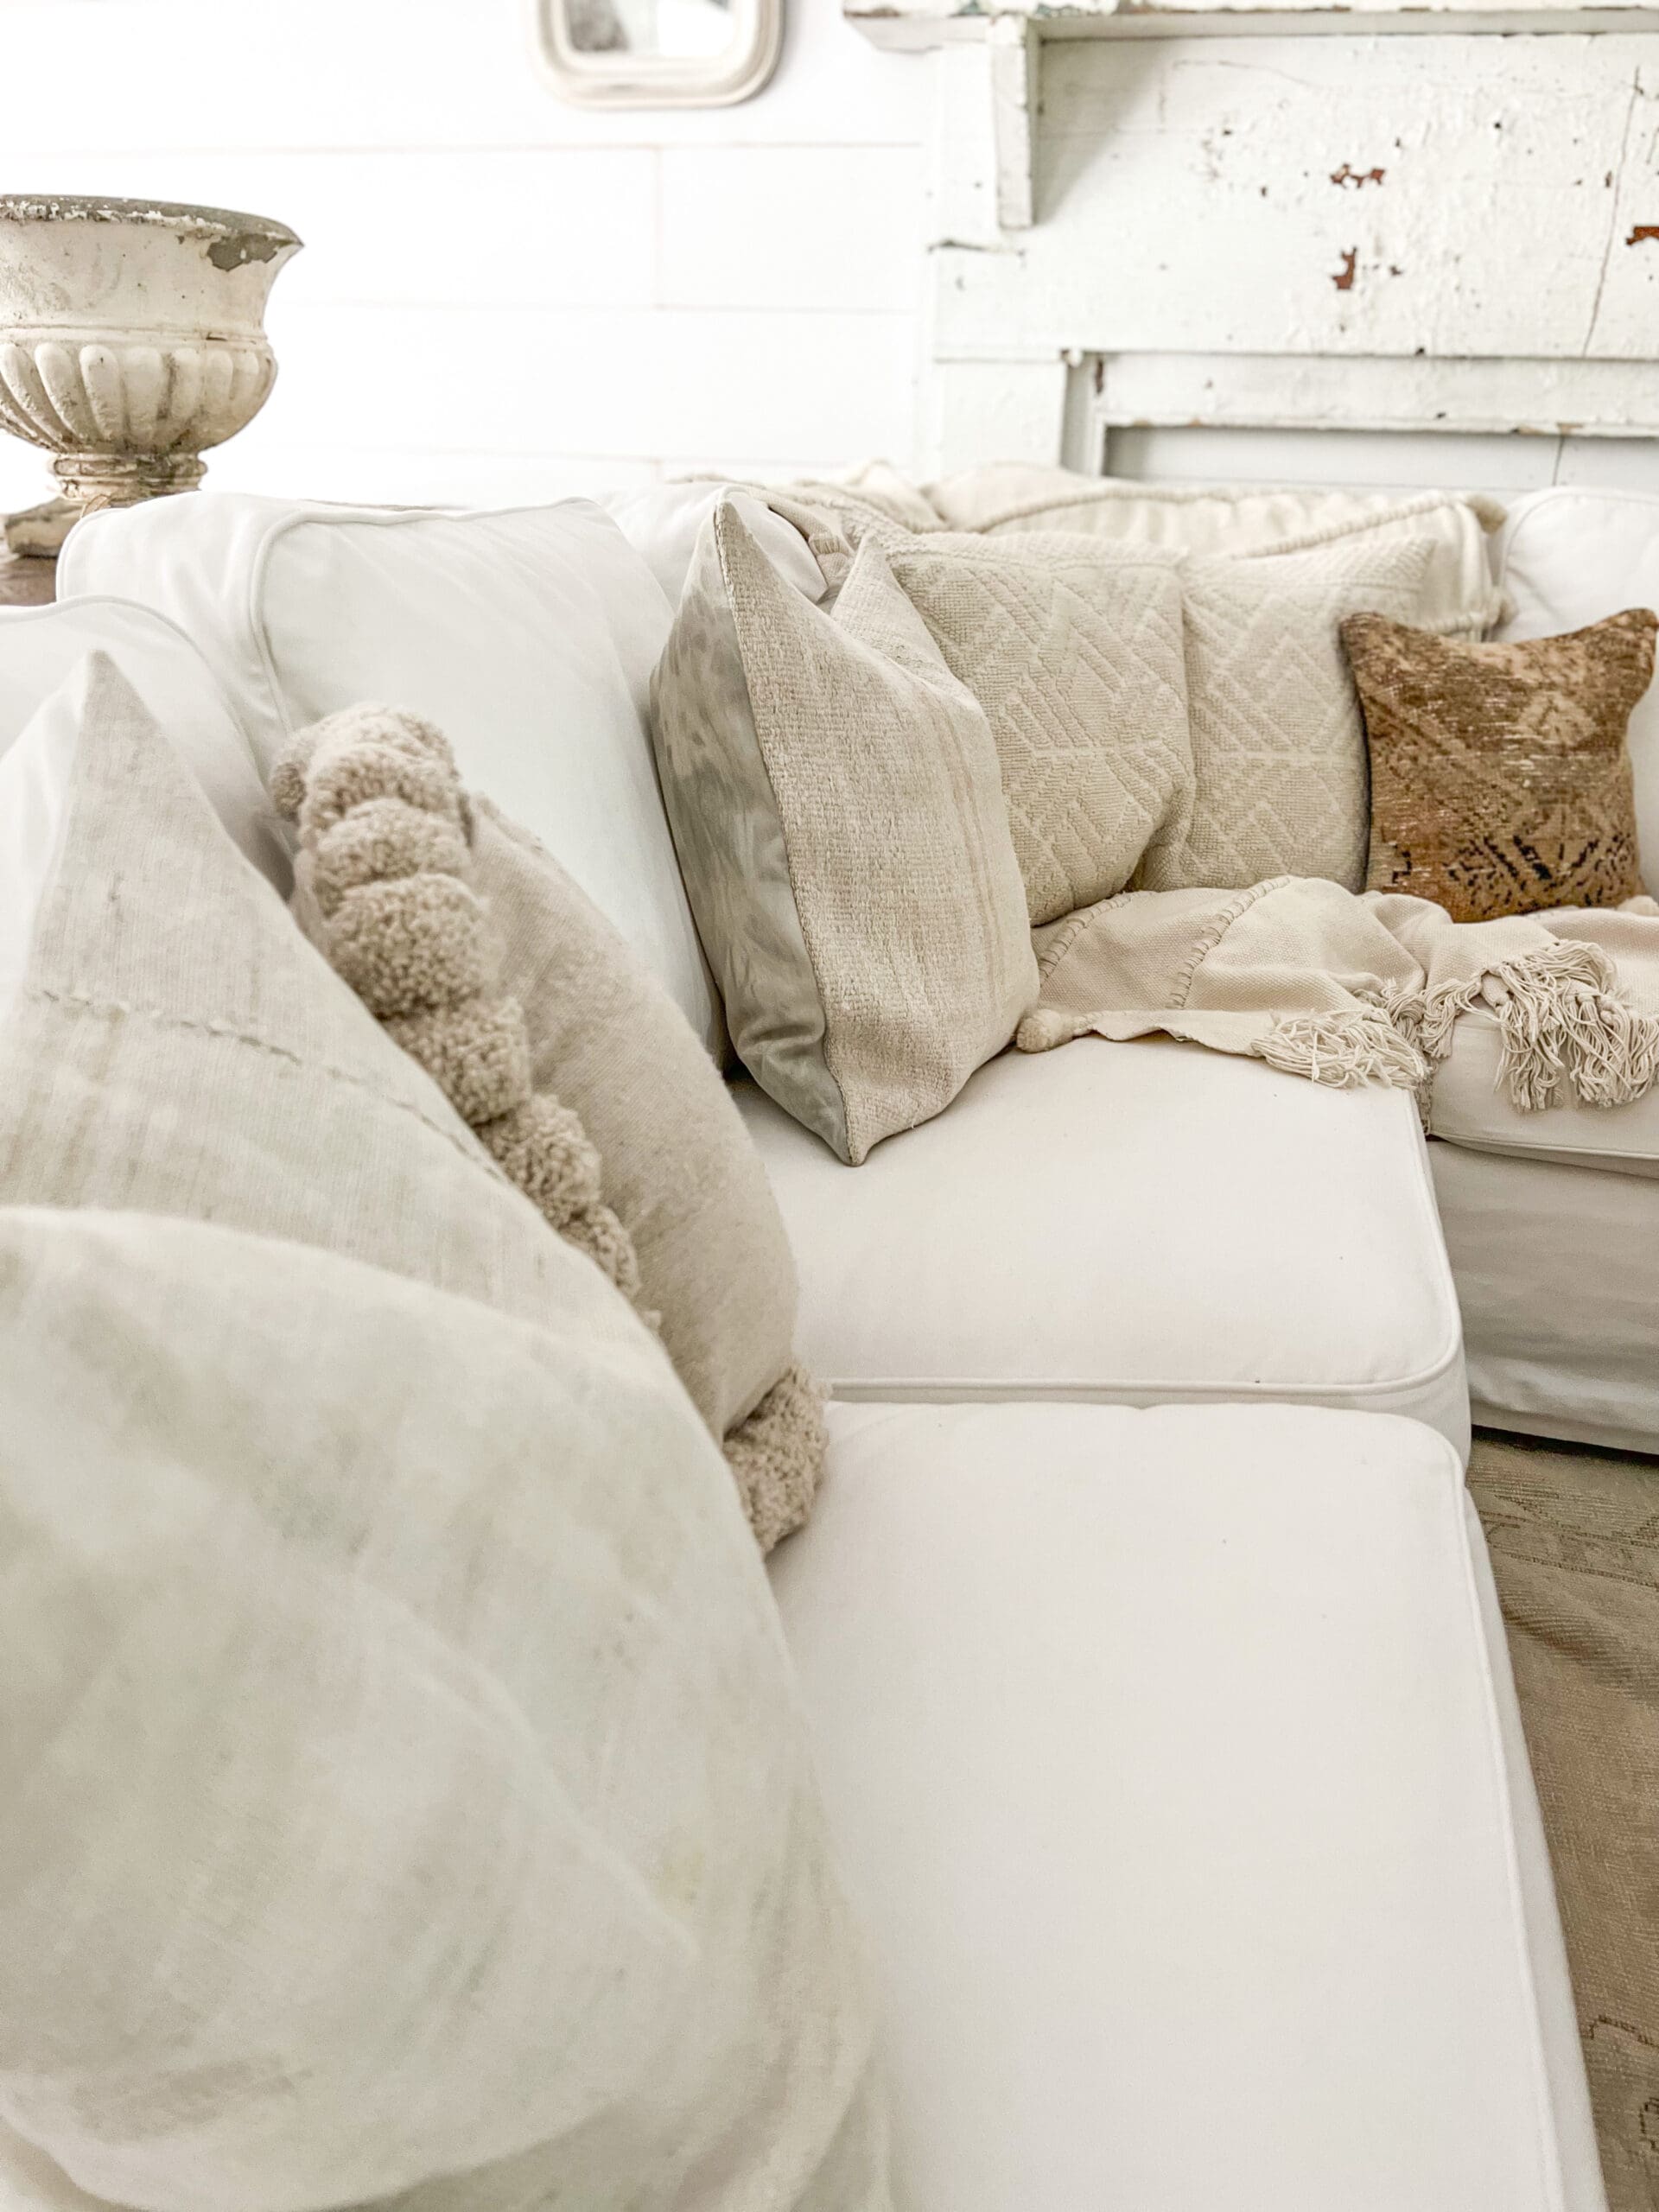 Comfy white couch with assorted white cushions and throw